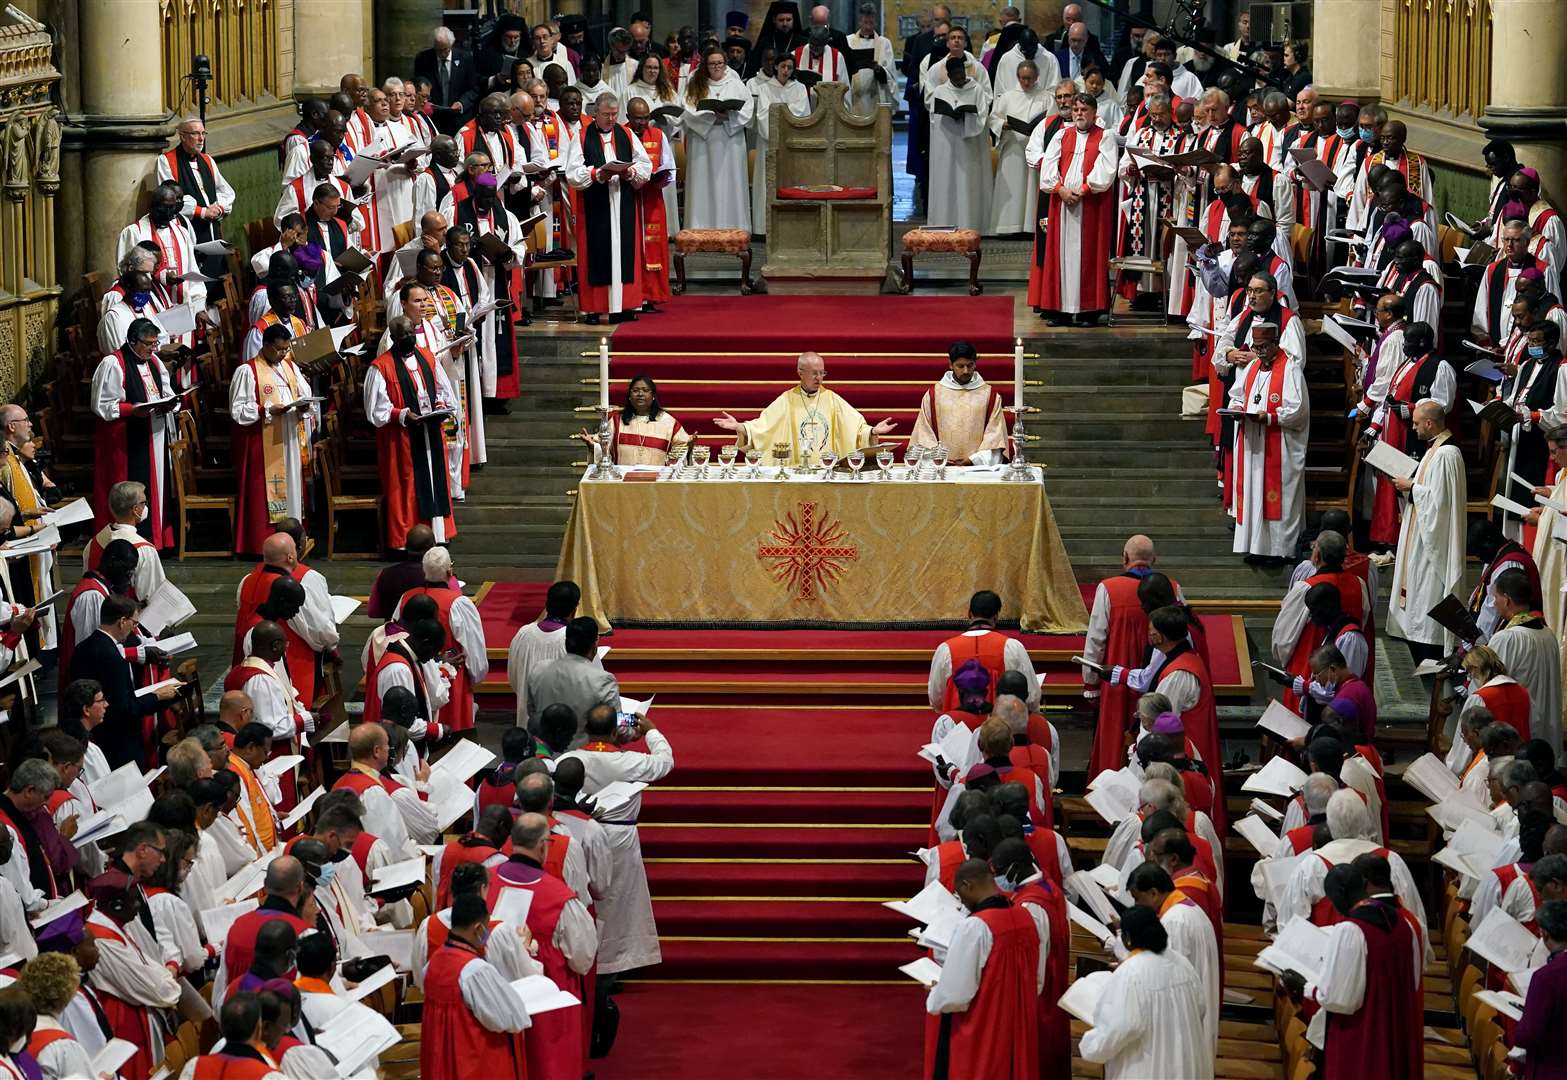 The Archbishop of Canterbury Justin Welby leads the opening service of the 15th Lambeth Conference at Canterbury cathedral in Kent (Gareth Fuller/PA)